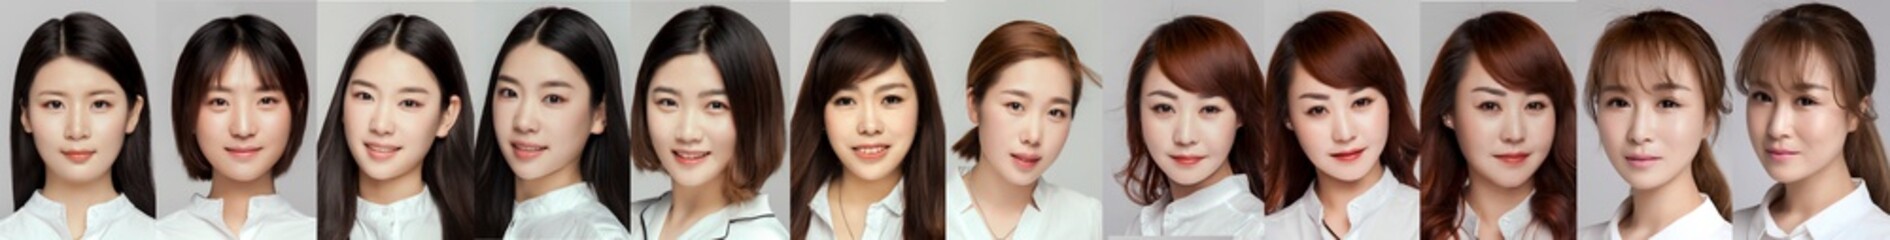 Smile combinations of girls of different ages in Asia